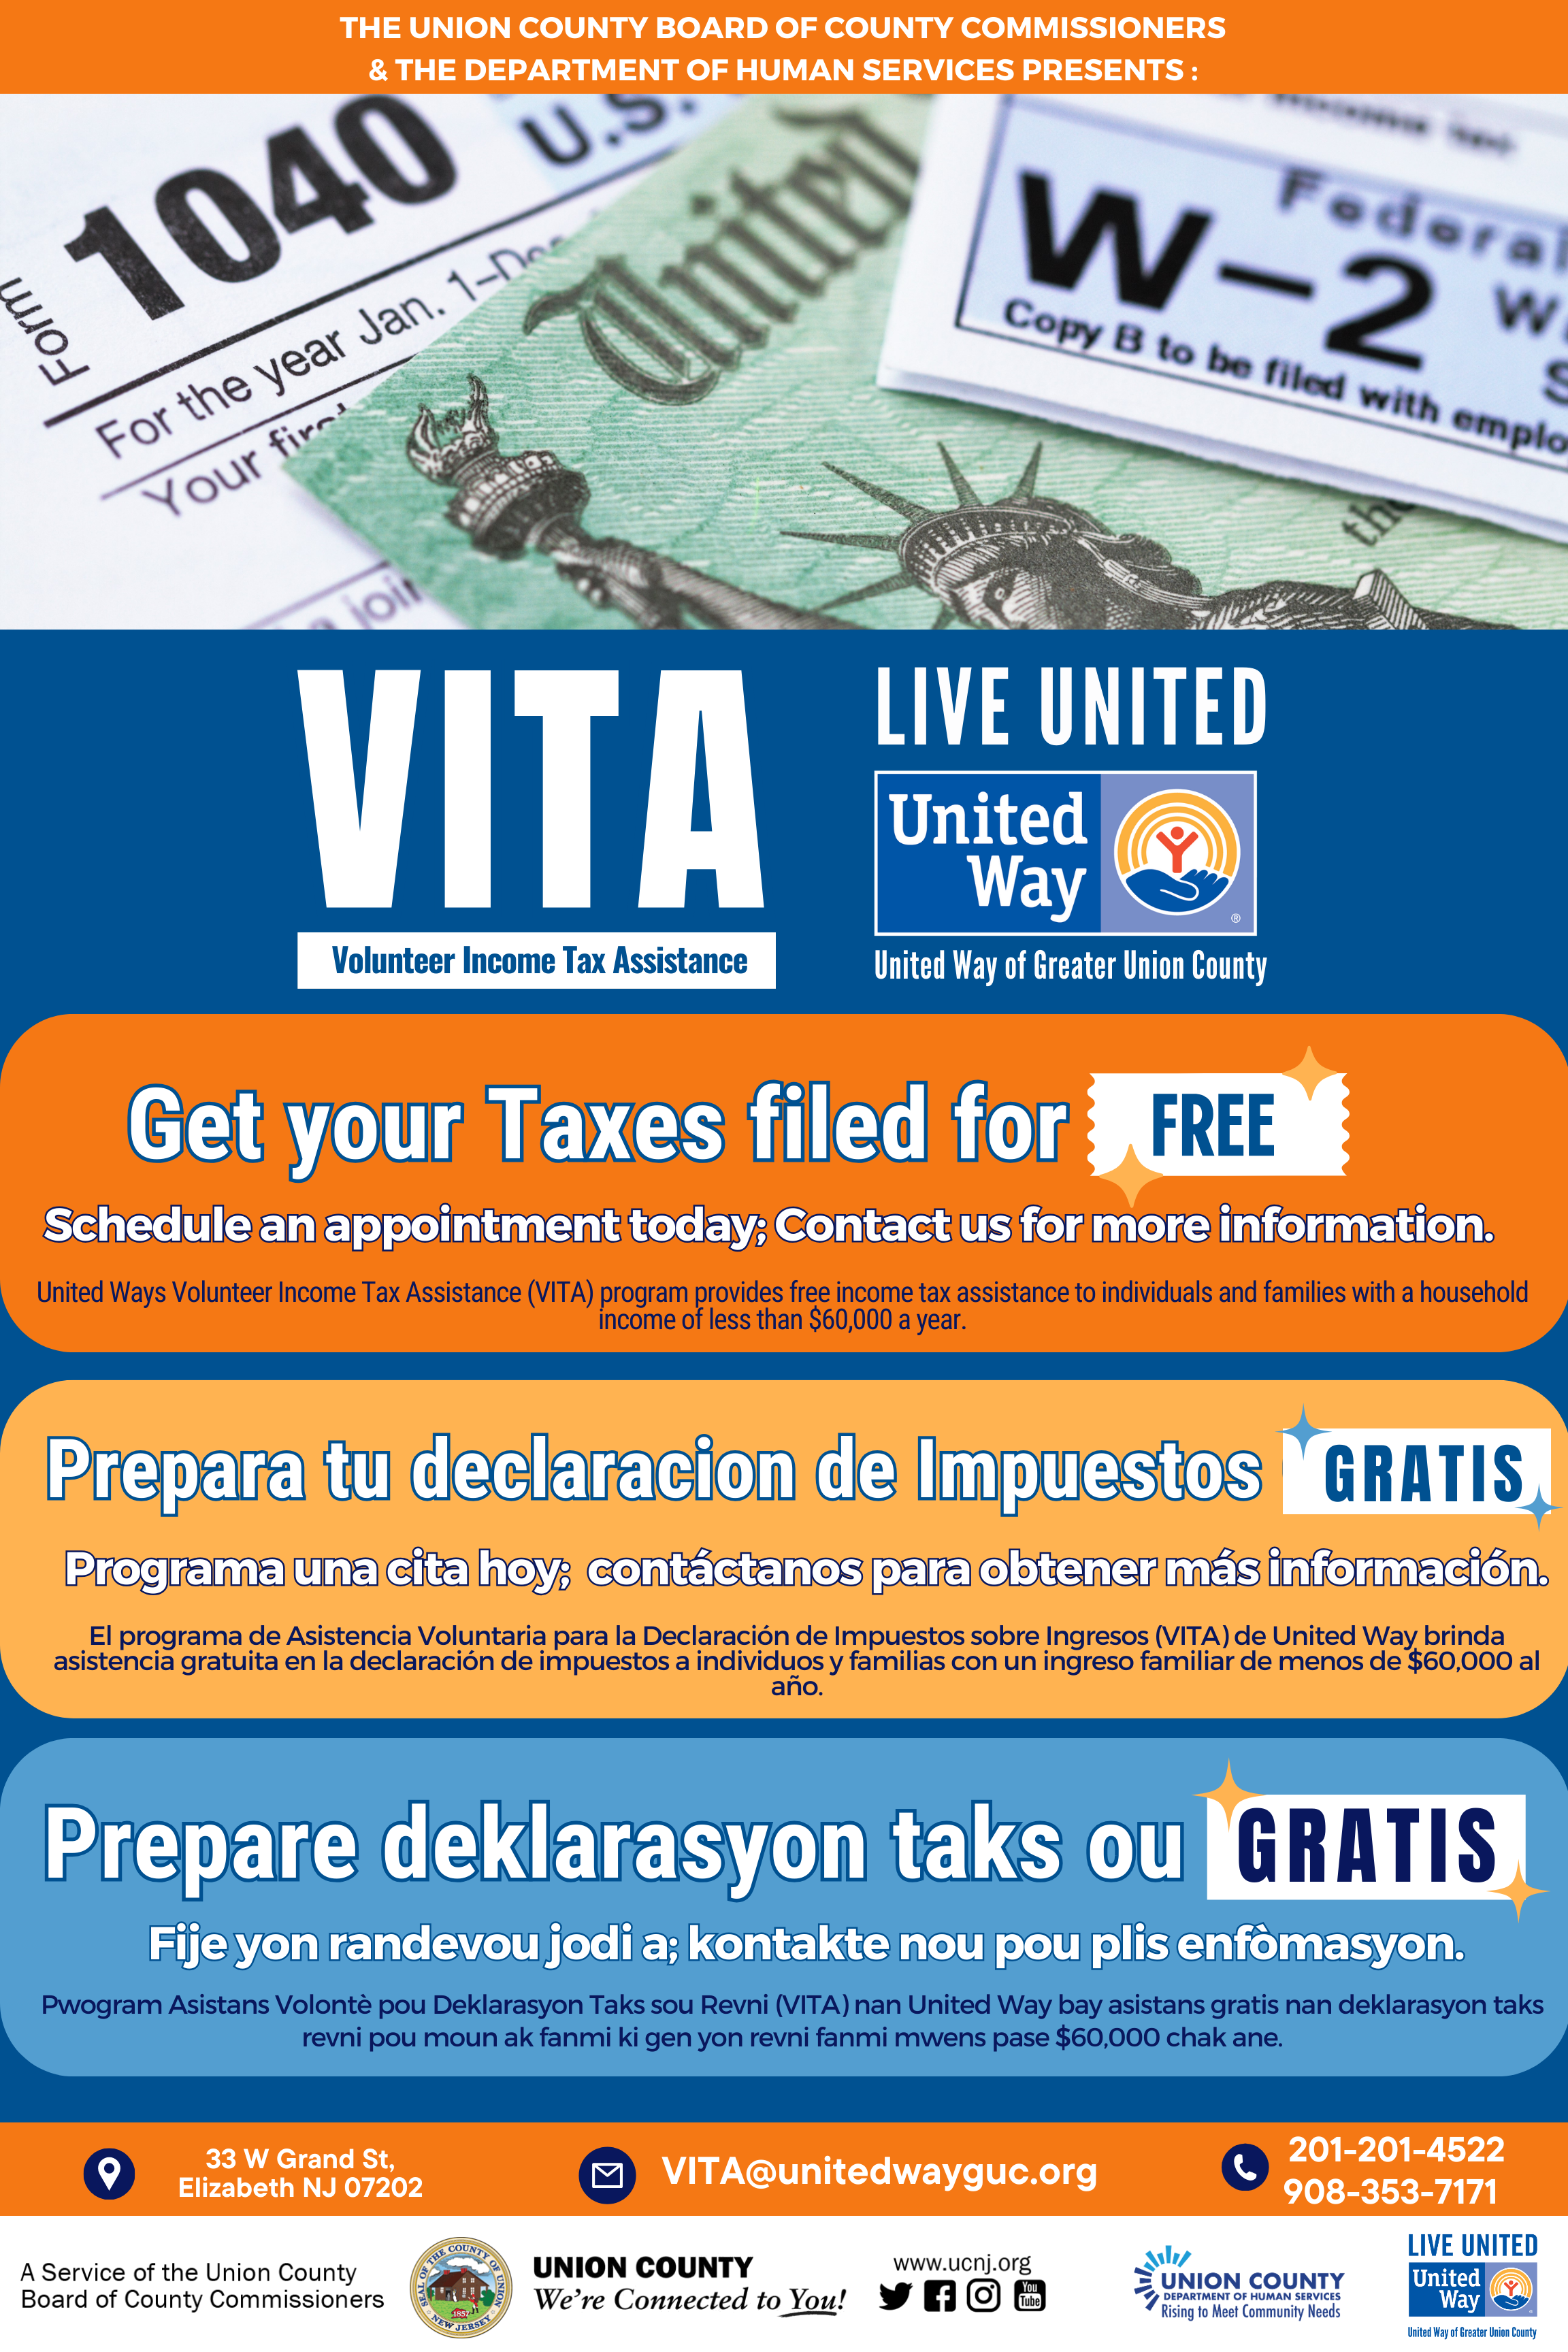 Union County Partners With United Way to Launch Free Volunteer Income Tax Assistance Program